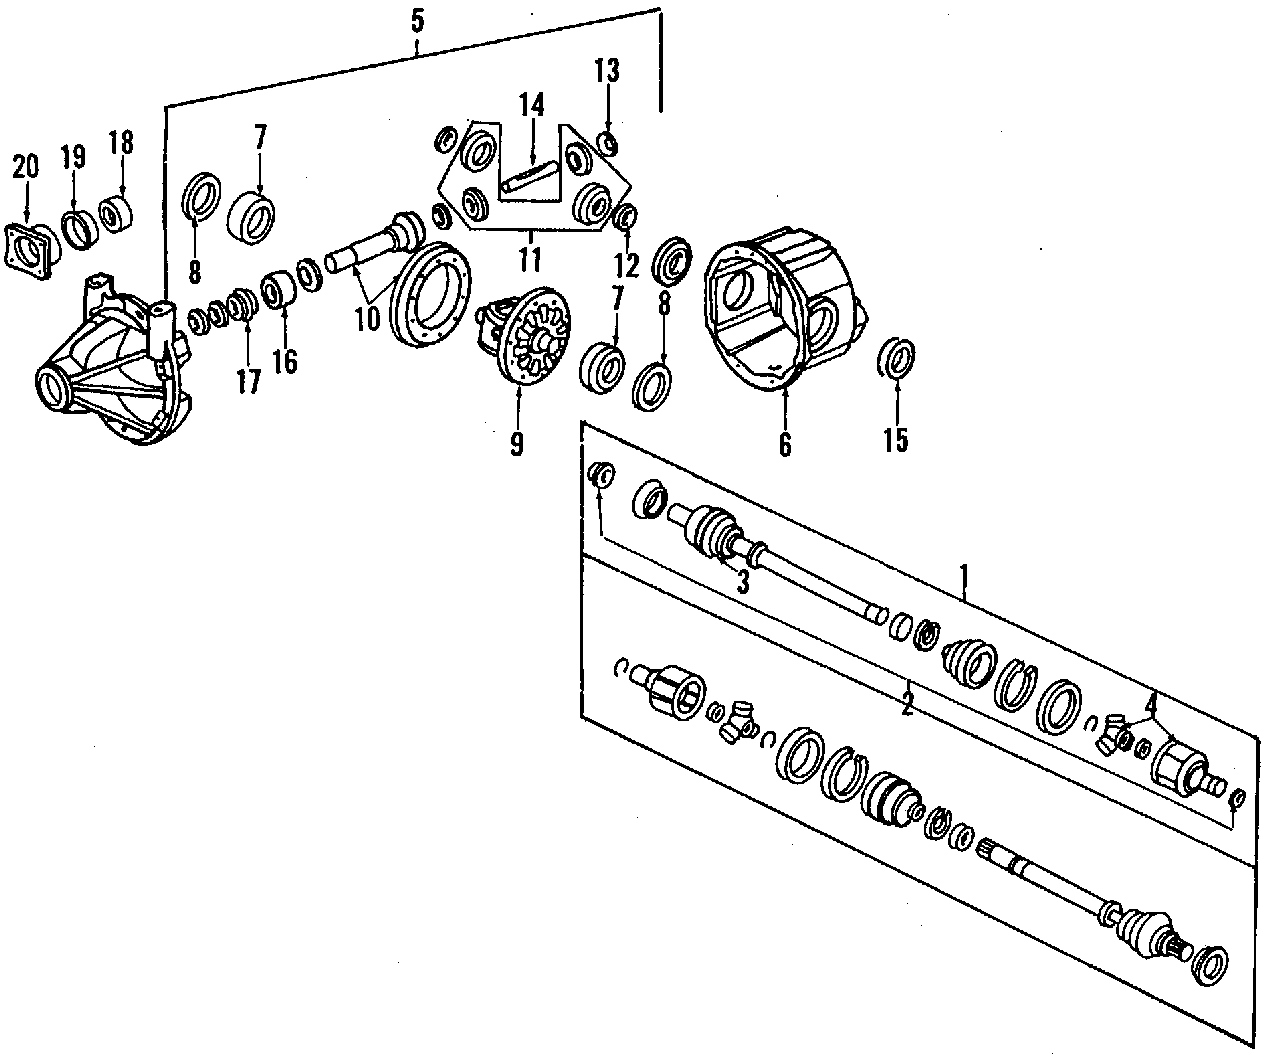 15REAR AXLE. AXLE SHAFTS & JOINTS. DIFFERENTIAL. PROPELLER SHAFT.https://images.simplepart.com/images/parts/motor/fullsize/F640360.png